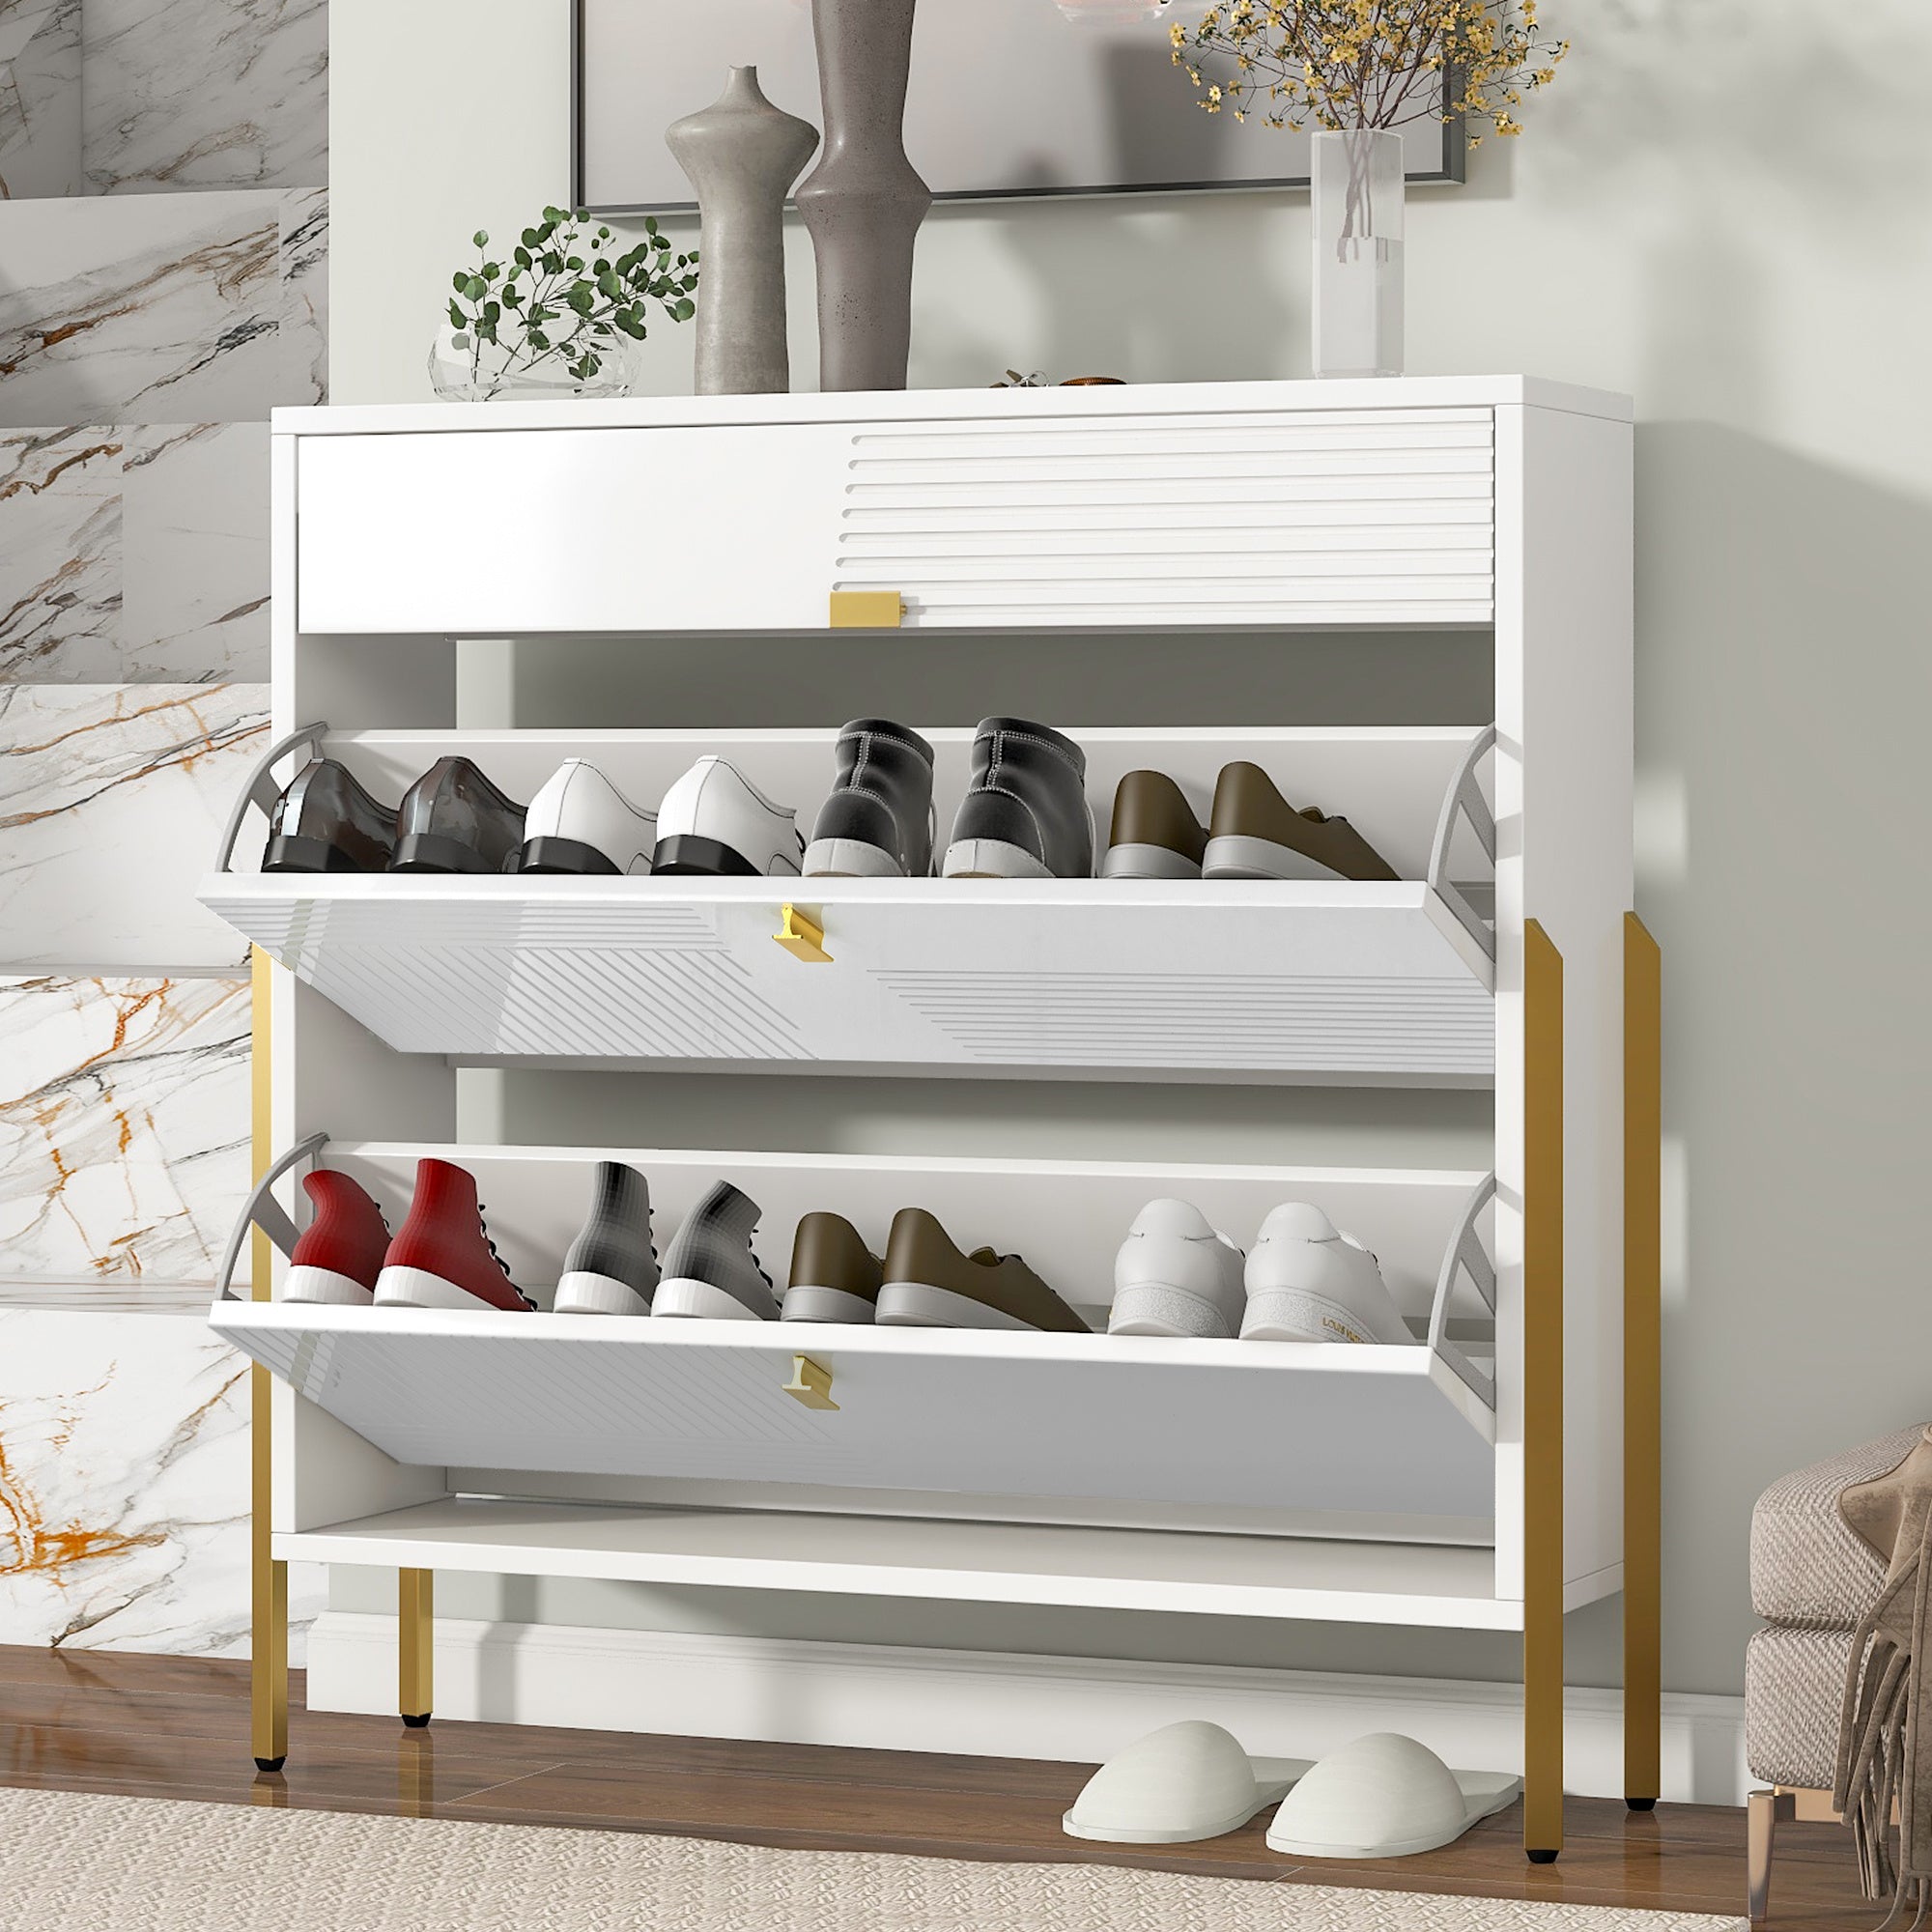 Shoe Cabinet with 2 Flip Drawers & 1 Slide Drawer, Modern Free Standing Shoe Rack for Heels, Boots, Slippers,Shoe Storage Cabinet for Entryway, Hallway